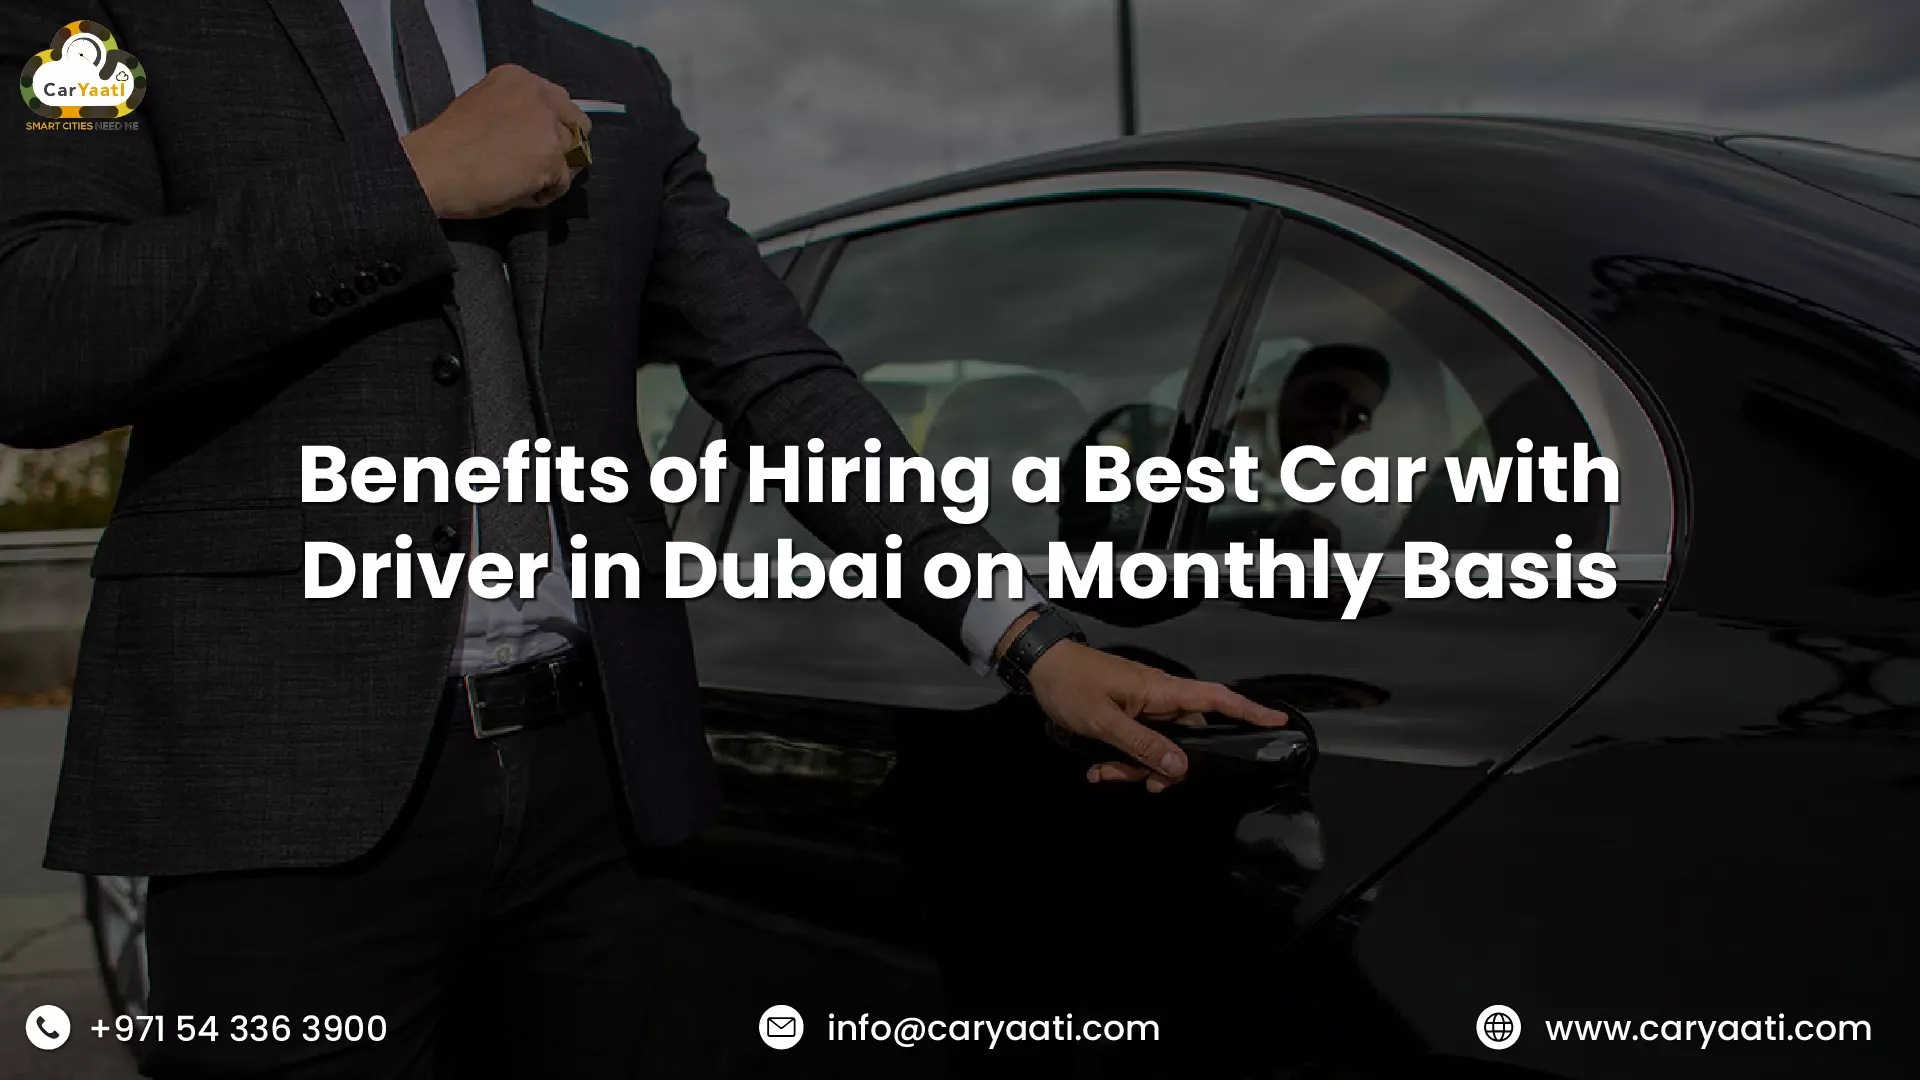 Benefits of Hiring a Best Car with Driver in Dubai on Monthly Basis